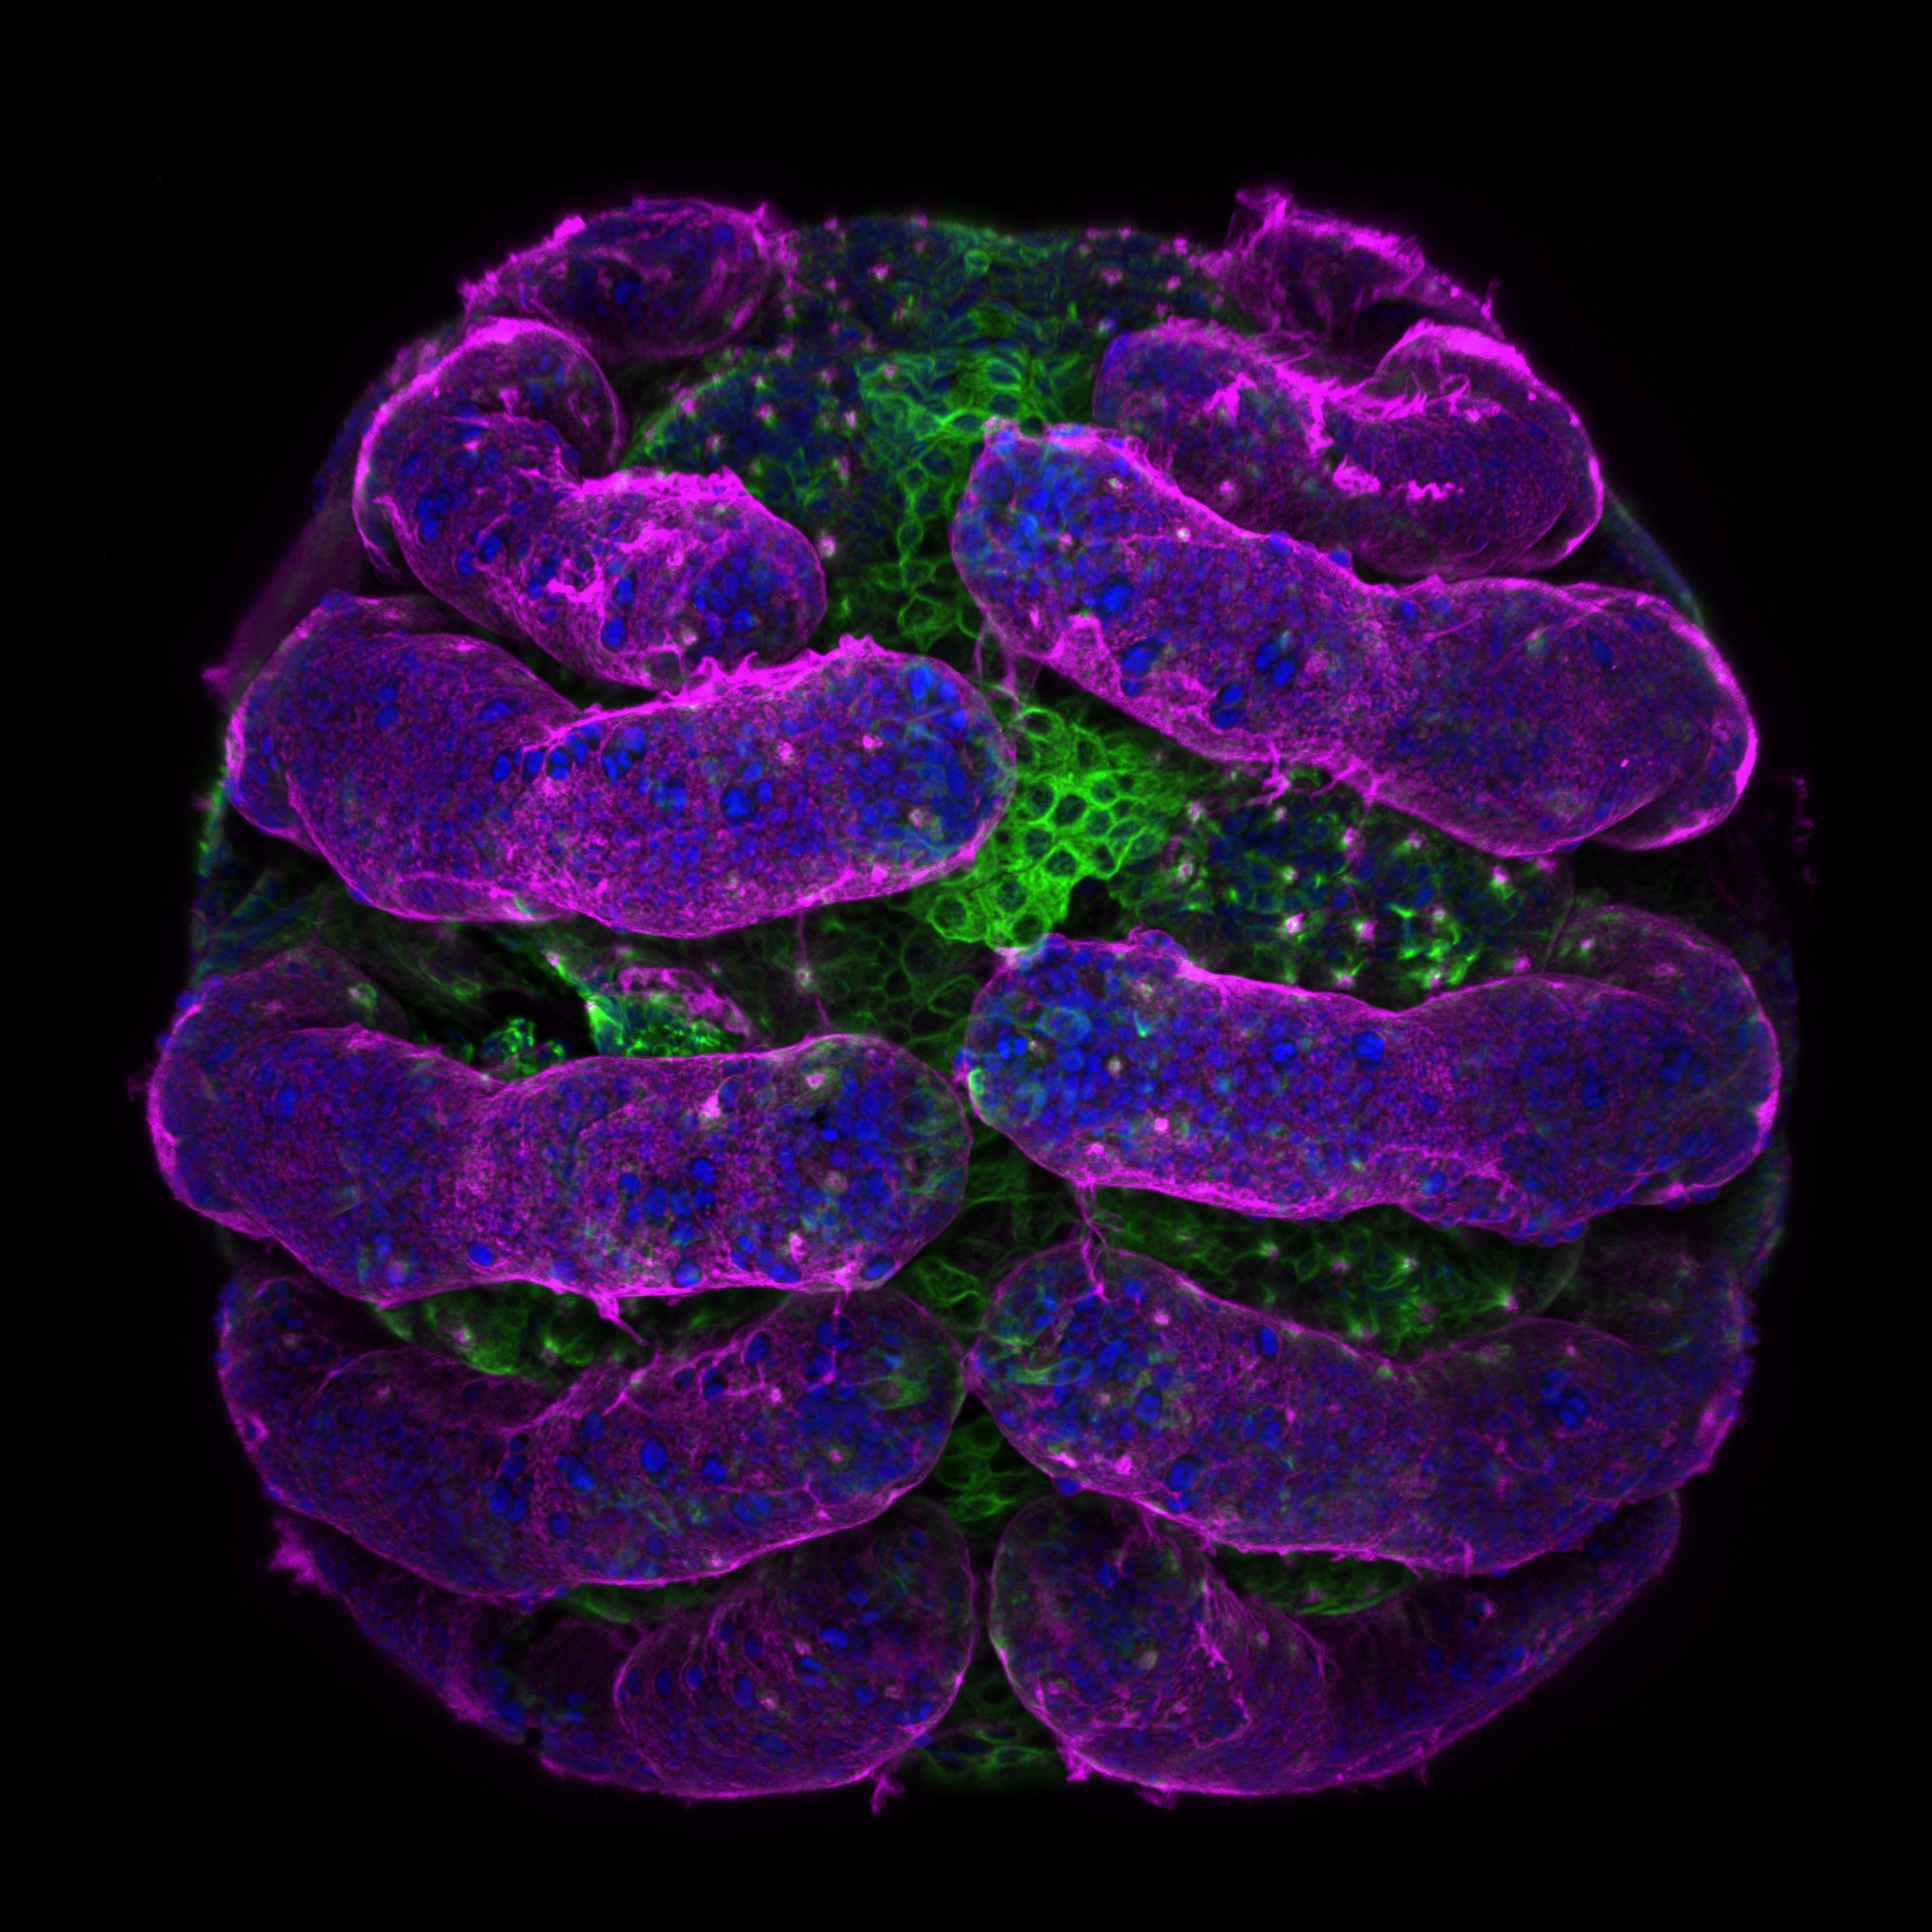 Parasteatoda tepidariorum (spider embryo)stained for embryo surface (pink), nuclei (blue) and microtubules (green). Credit: Tessa Montague